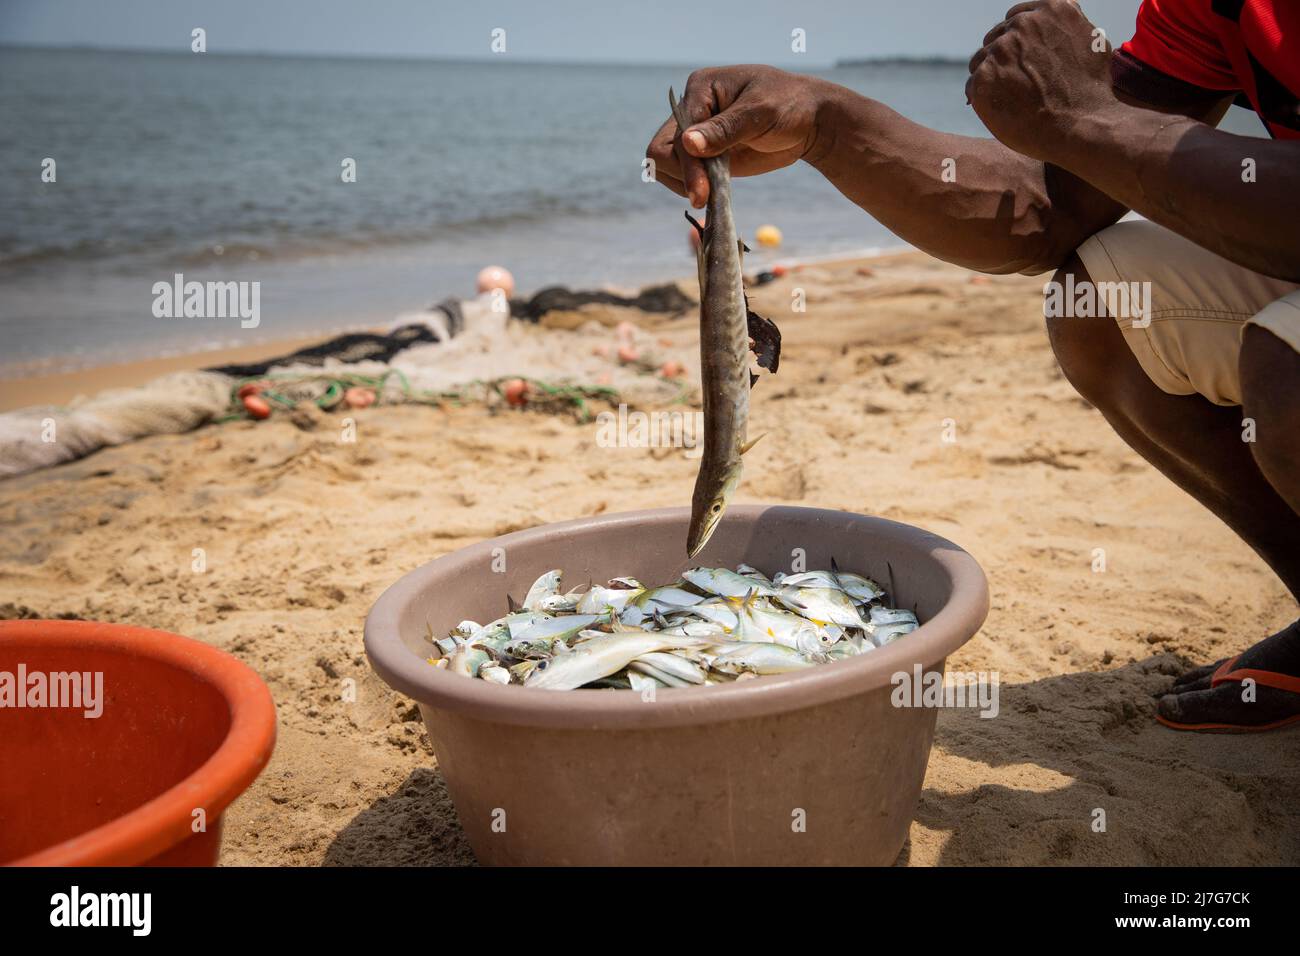 Close-up of a fisherman's hand lifting a fish from the fish bucket he just caught after a fishing session Stock Photo